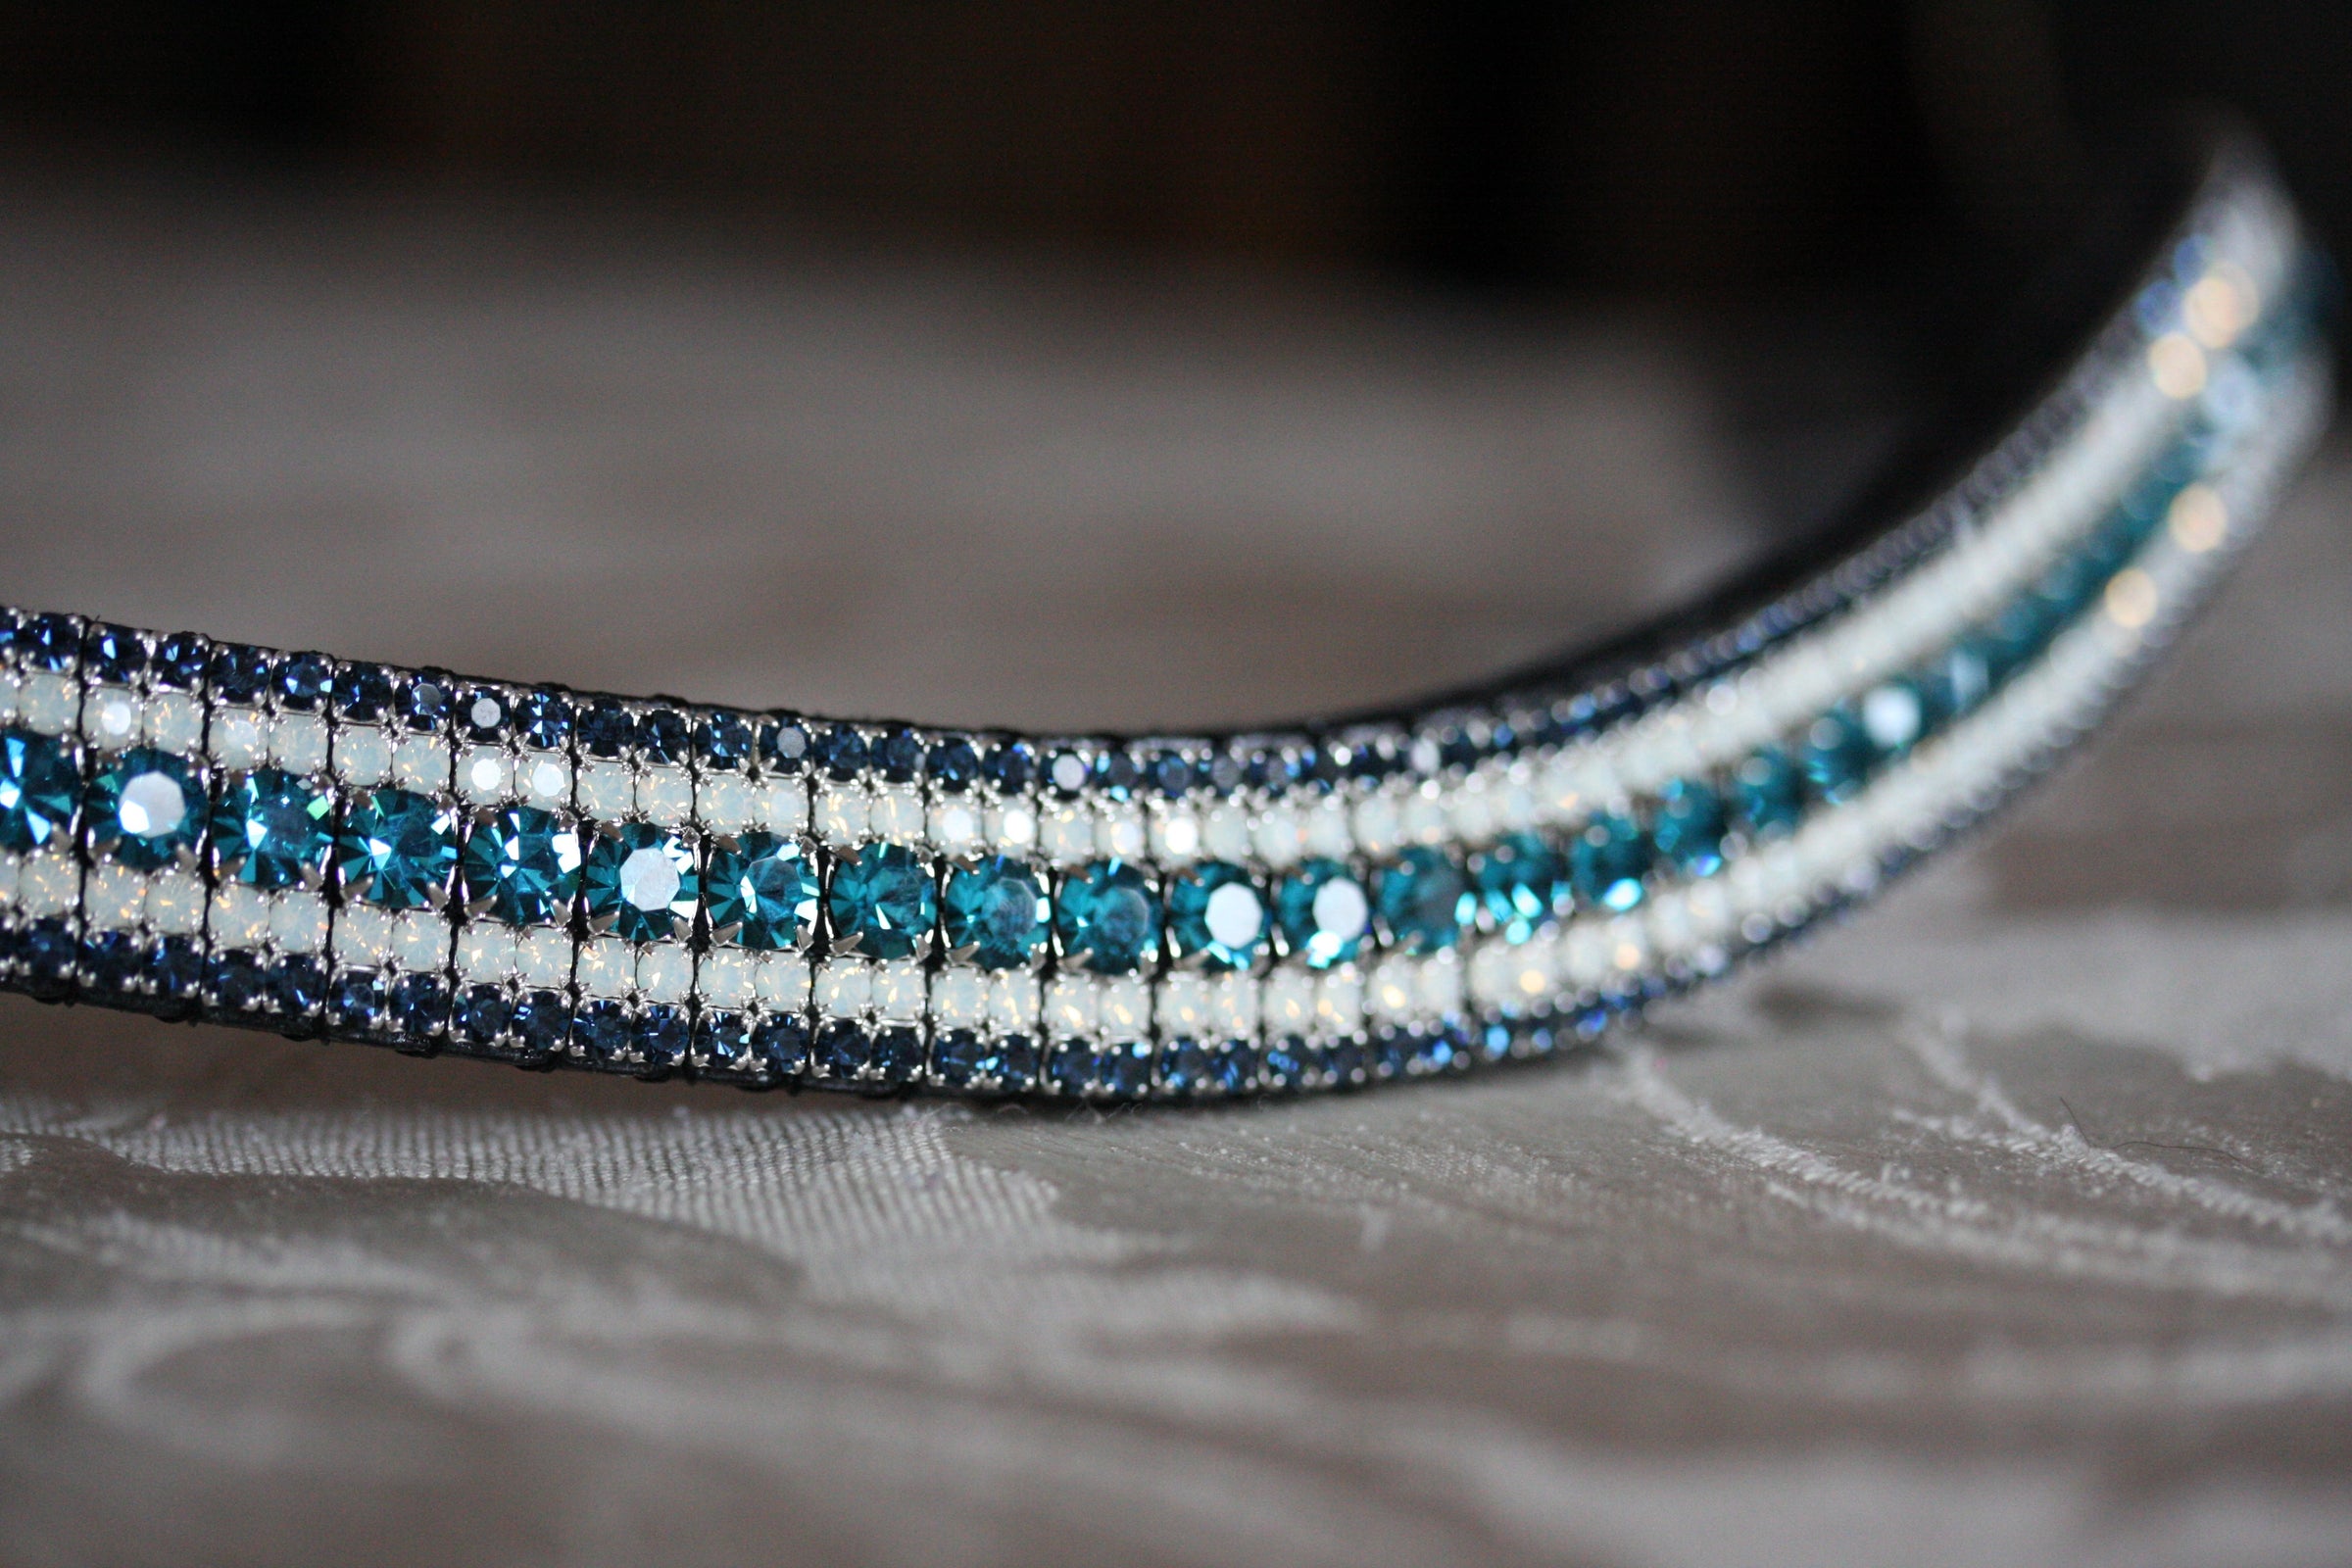 Equiture Indicolite, opal and montana megabling curve browband